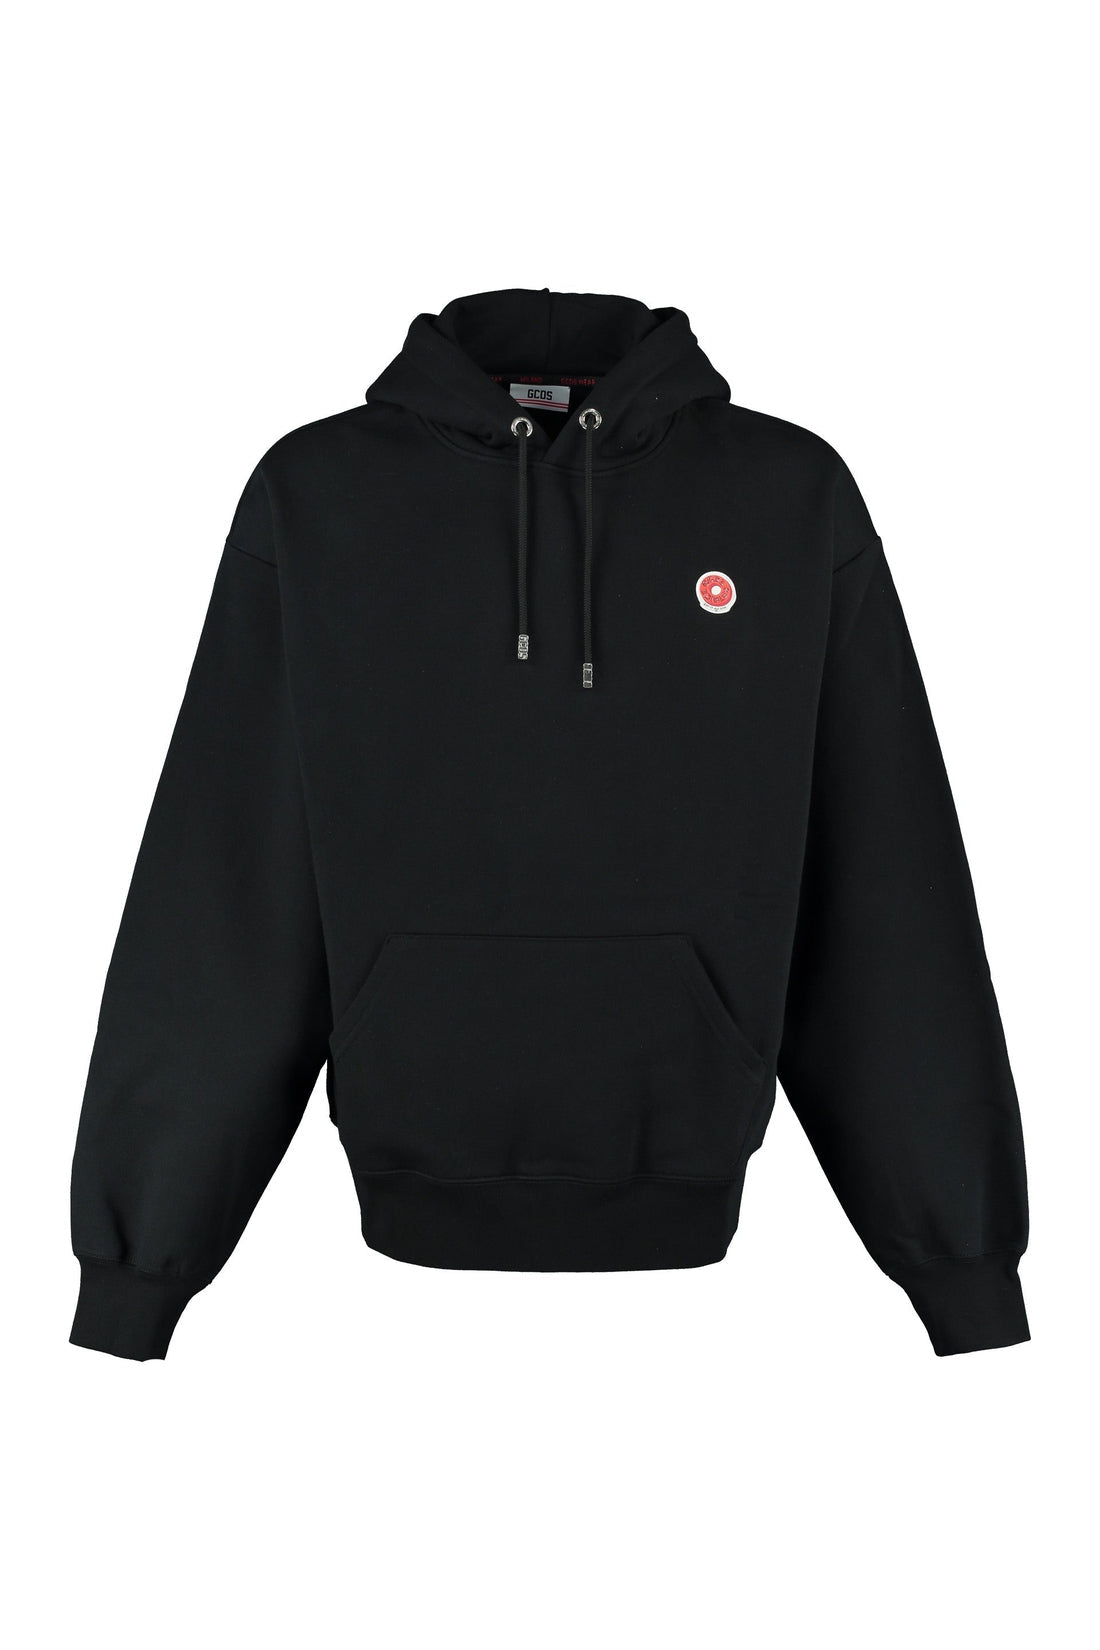 GCDS-OUTLET-SALE-Printed hoodie-ARCHIVIST